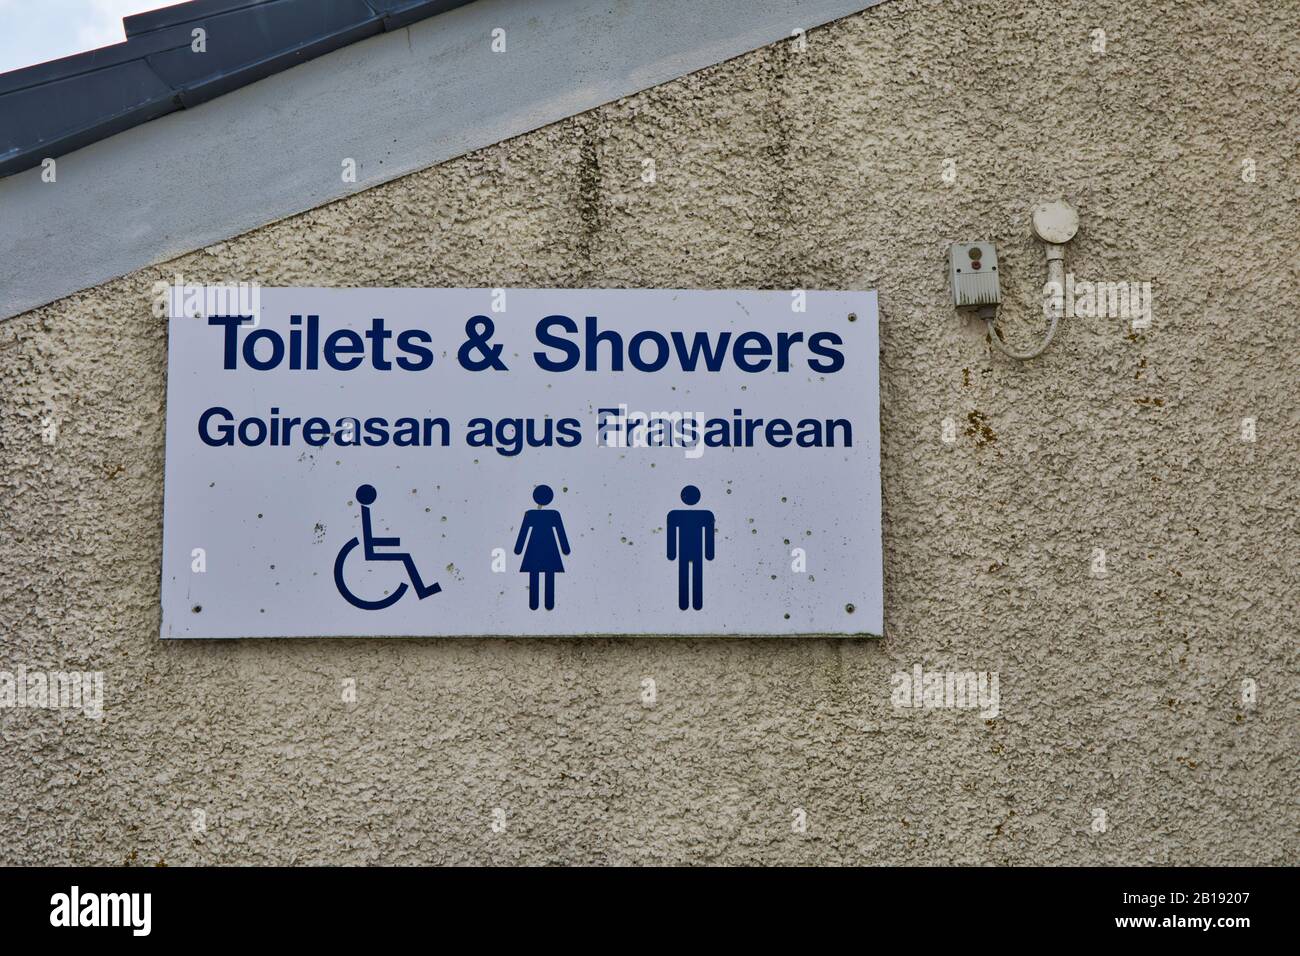 Public toilets and showers sign in English and Gaelic on the island of Scalpay, Isle of Harris, Outer Hebrides, Scotland Stock Photo